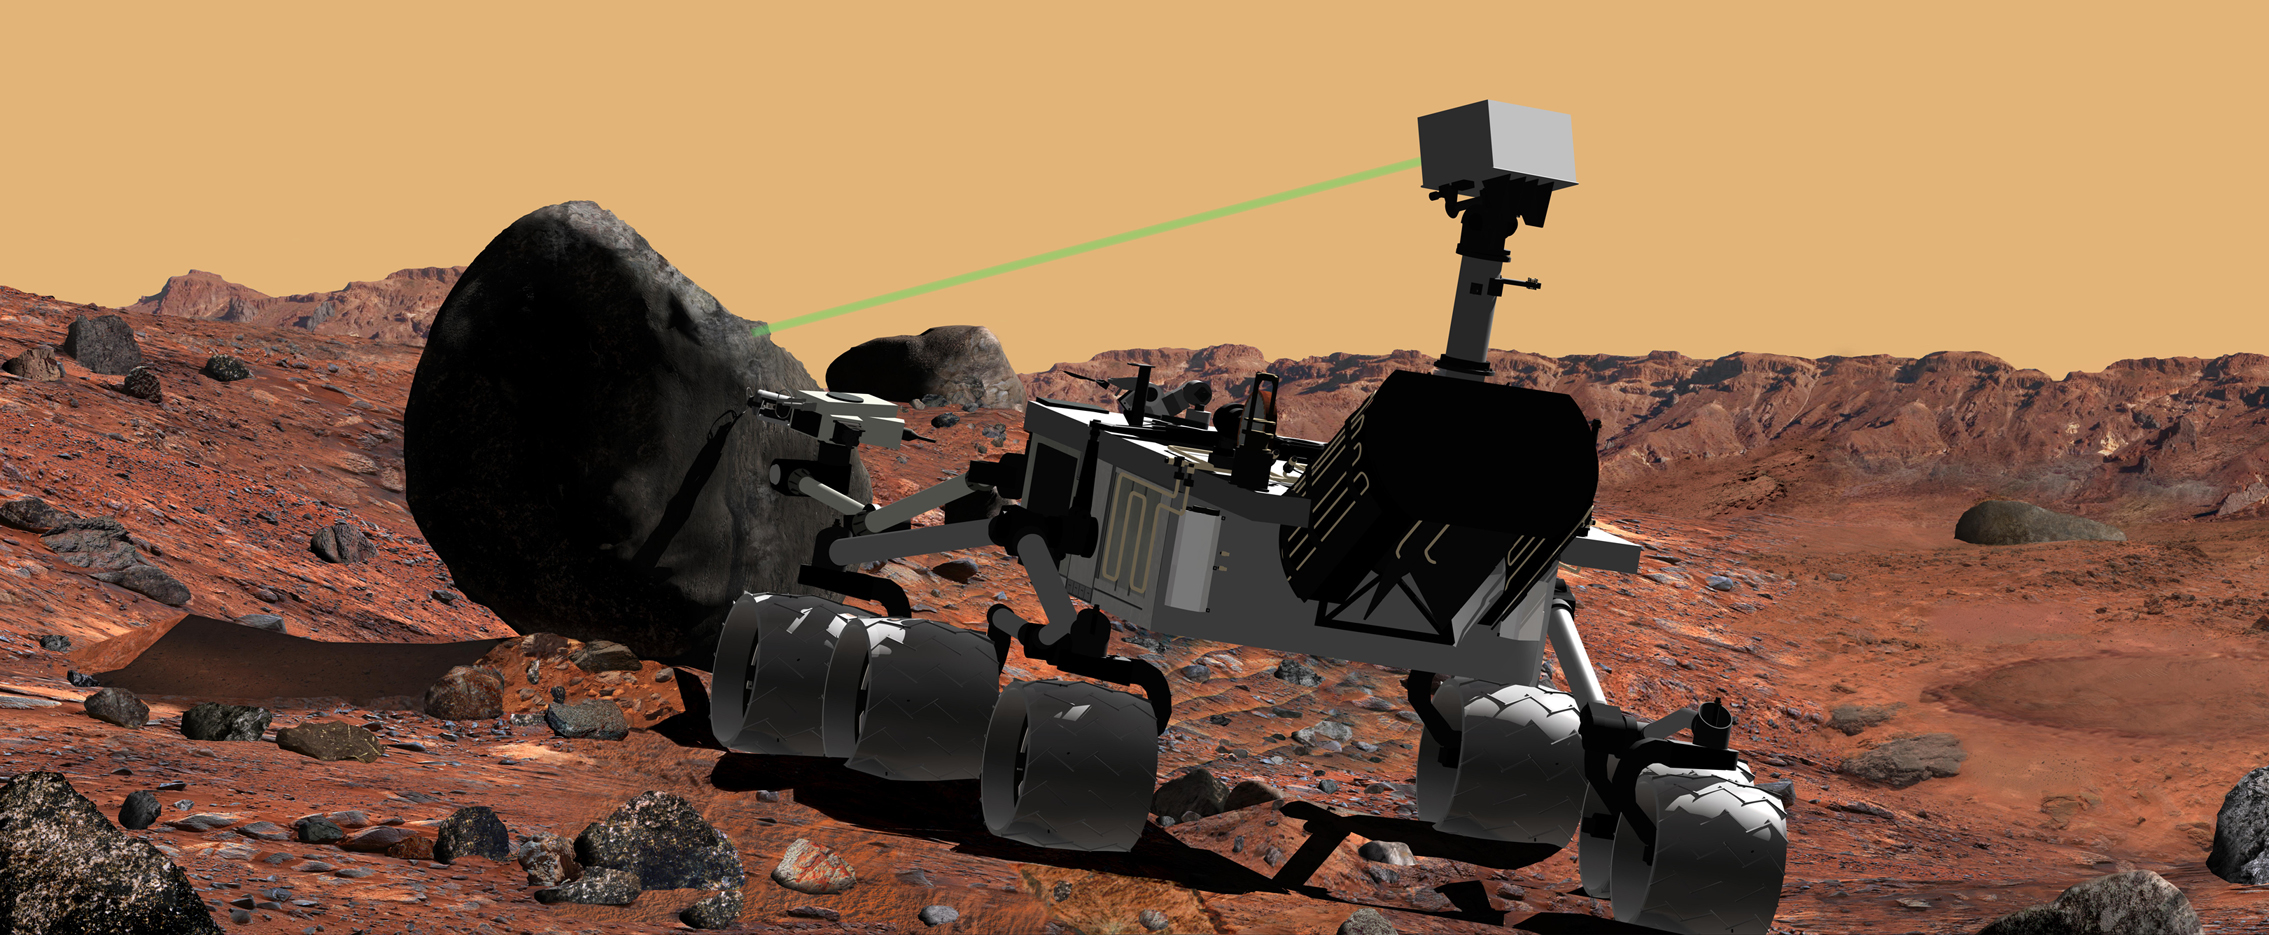 This artist's conception of NASA's Mars Science Laboratory portrays use of the rover's ChemCam instrument to identify the chemical composition of a rock sample on the surface of Mars.